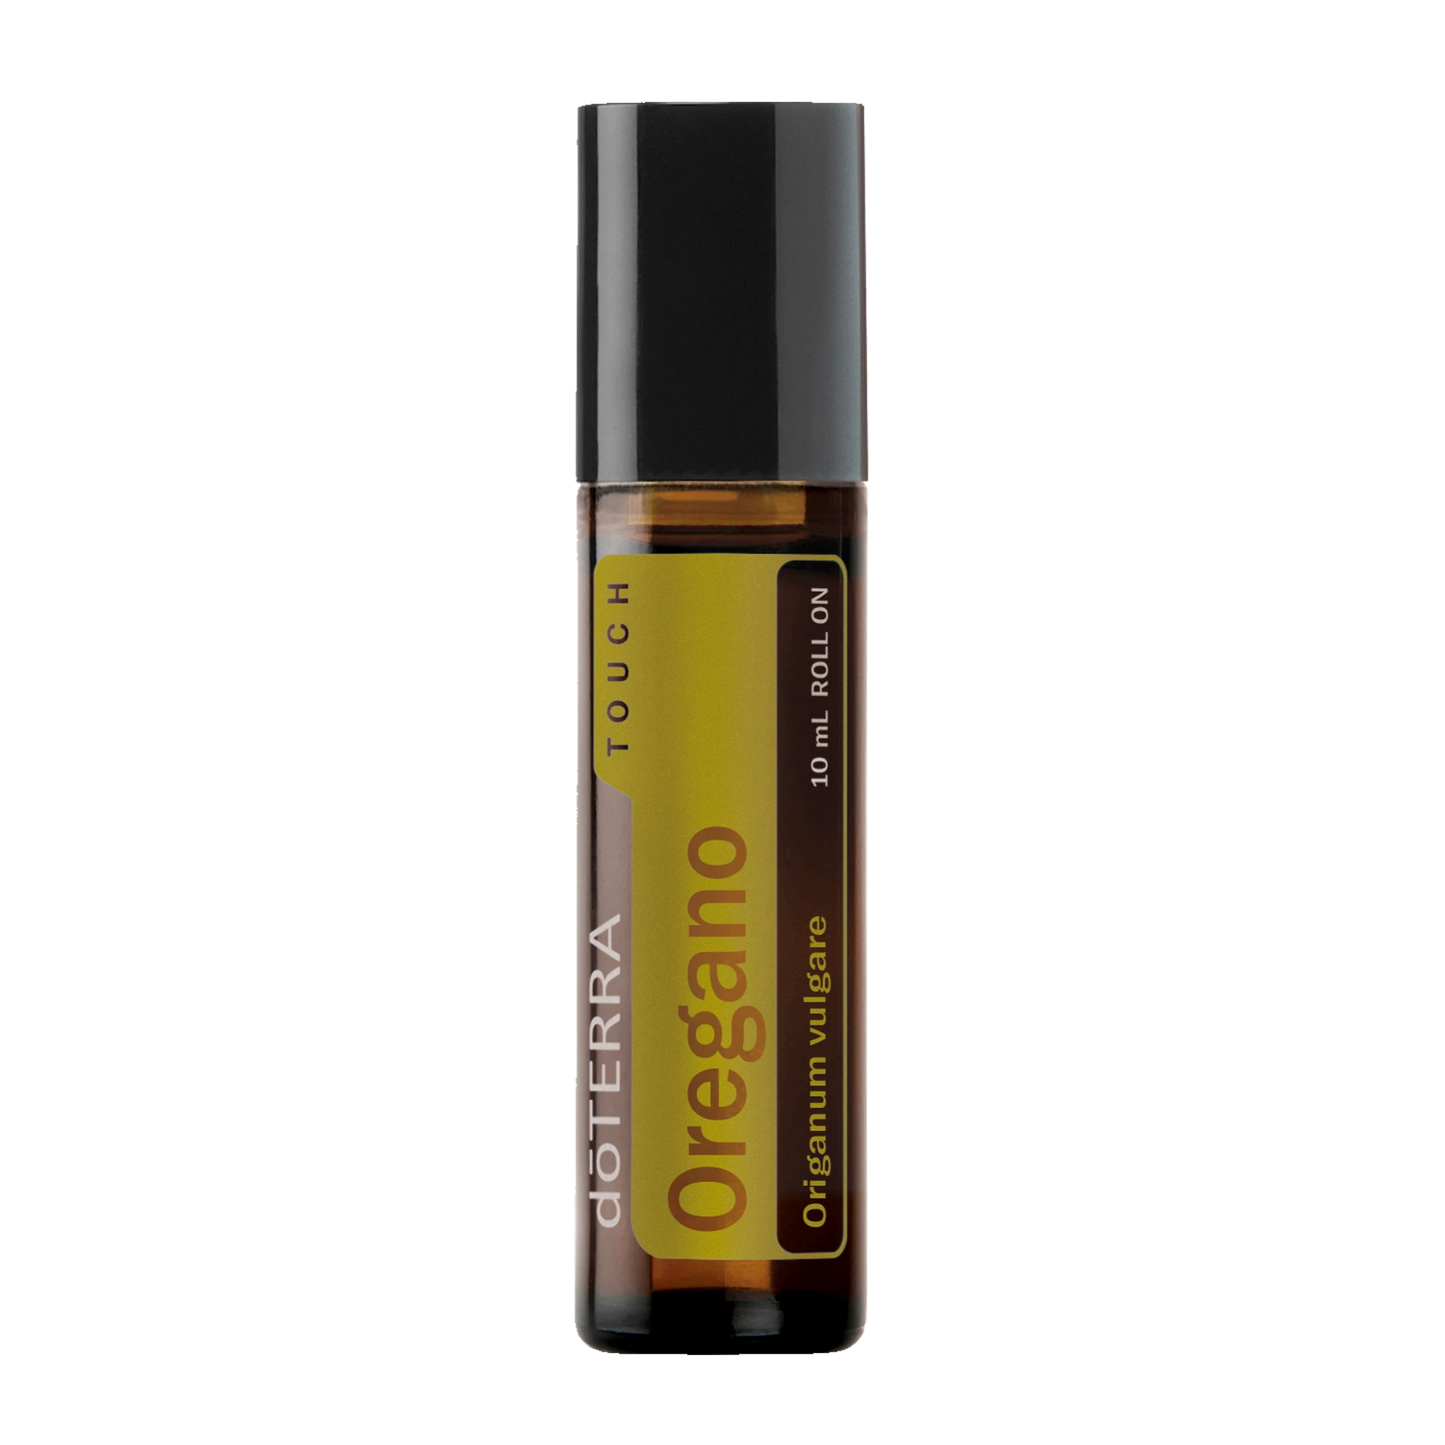 Oregano Touch Essential Oil 10ml Roll On